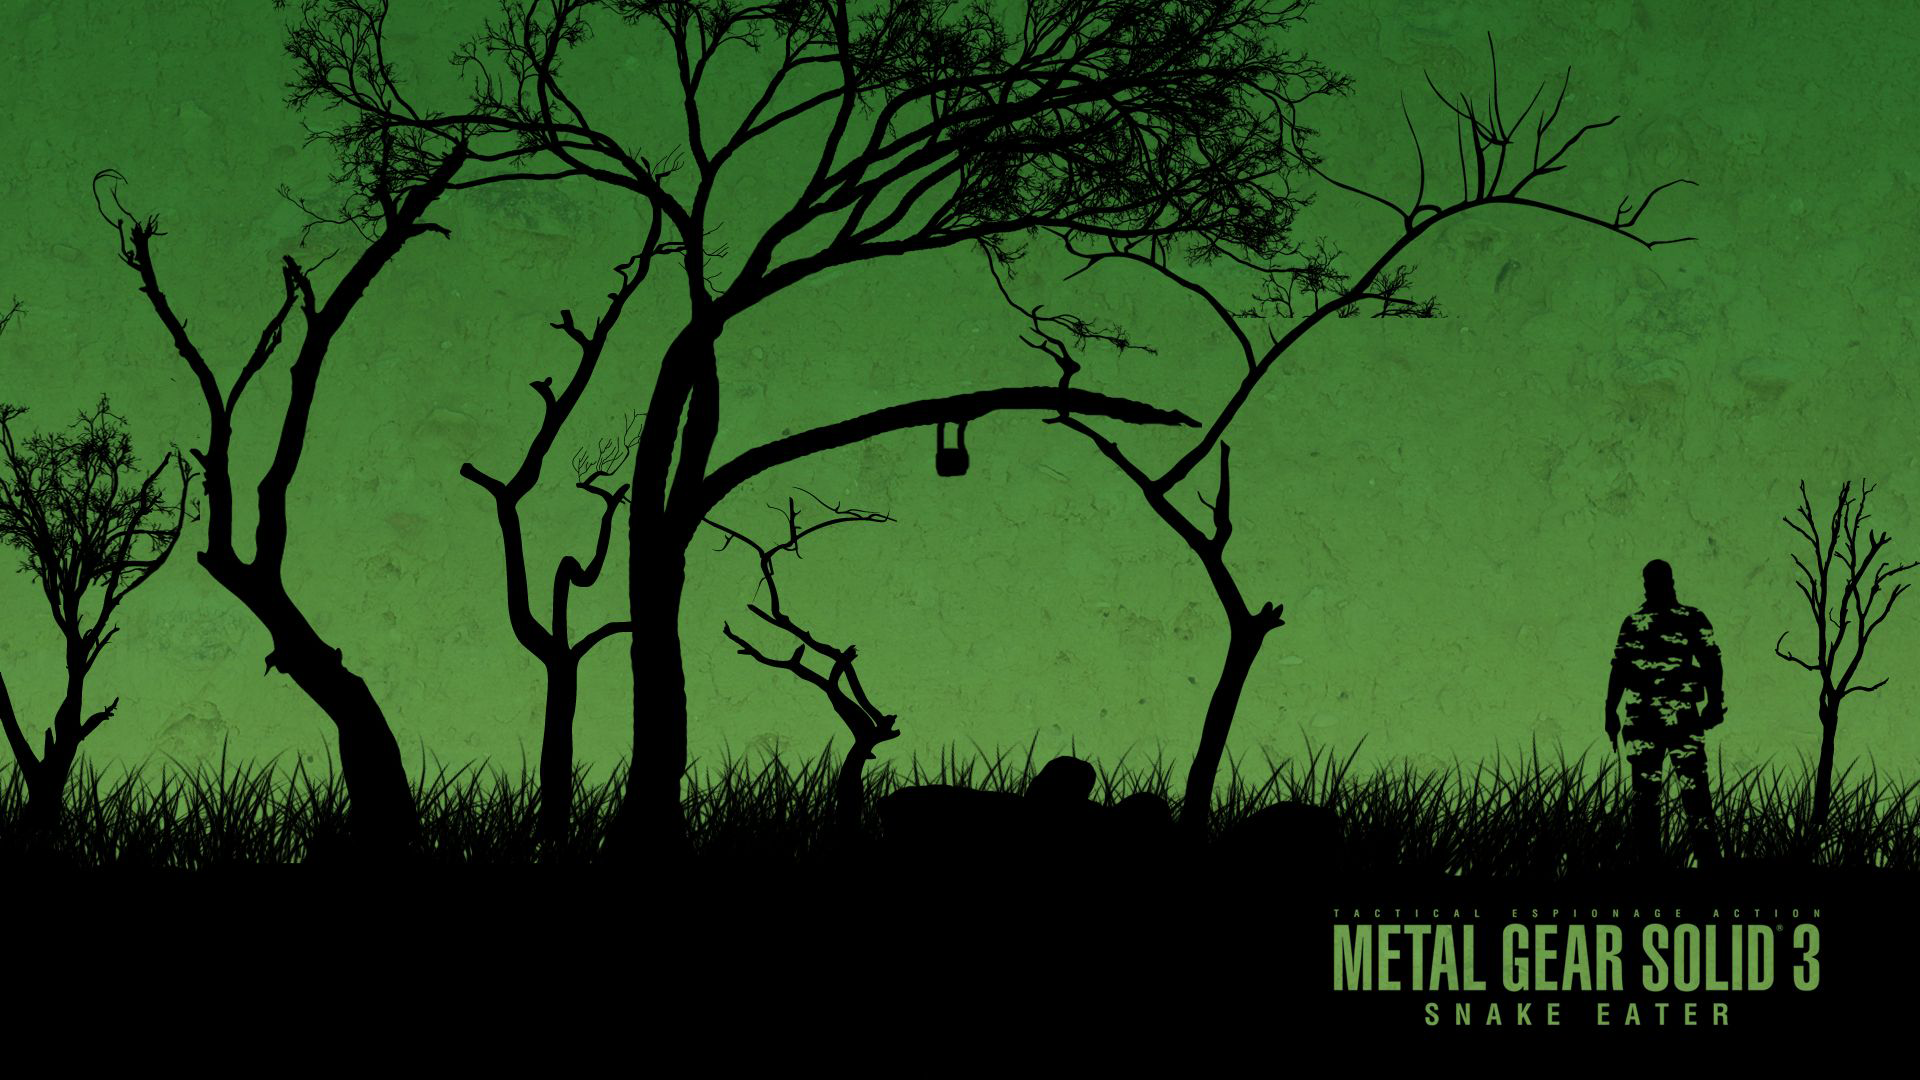 Metal Gear Solid 3 Snake Eater Hd Wallpapers Background Images